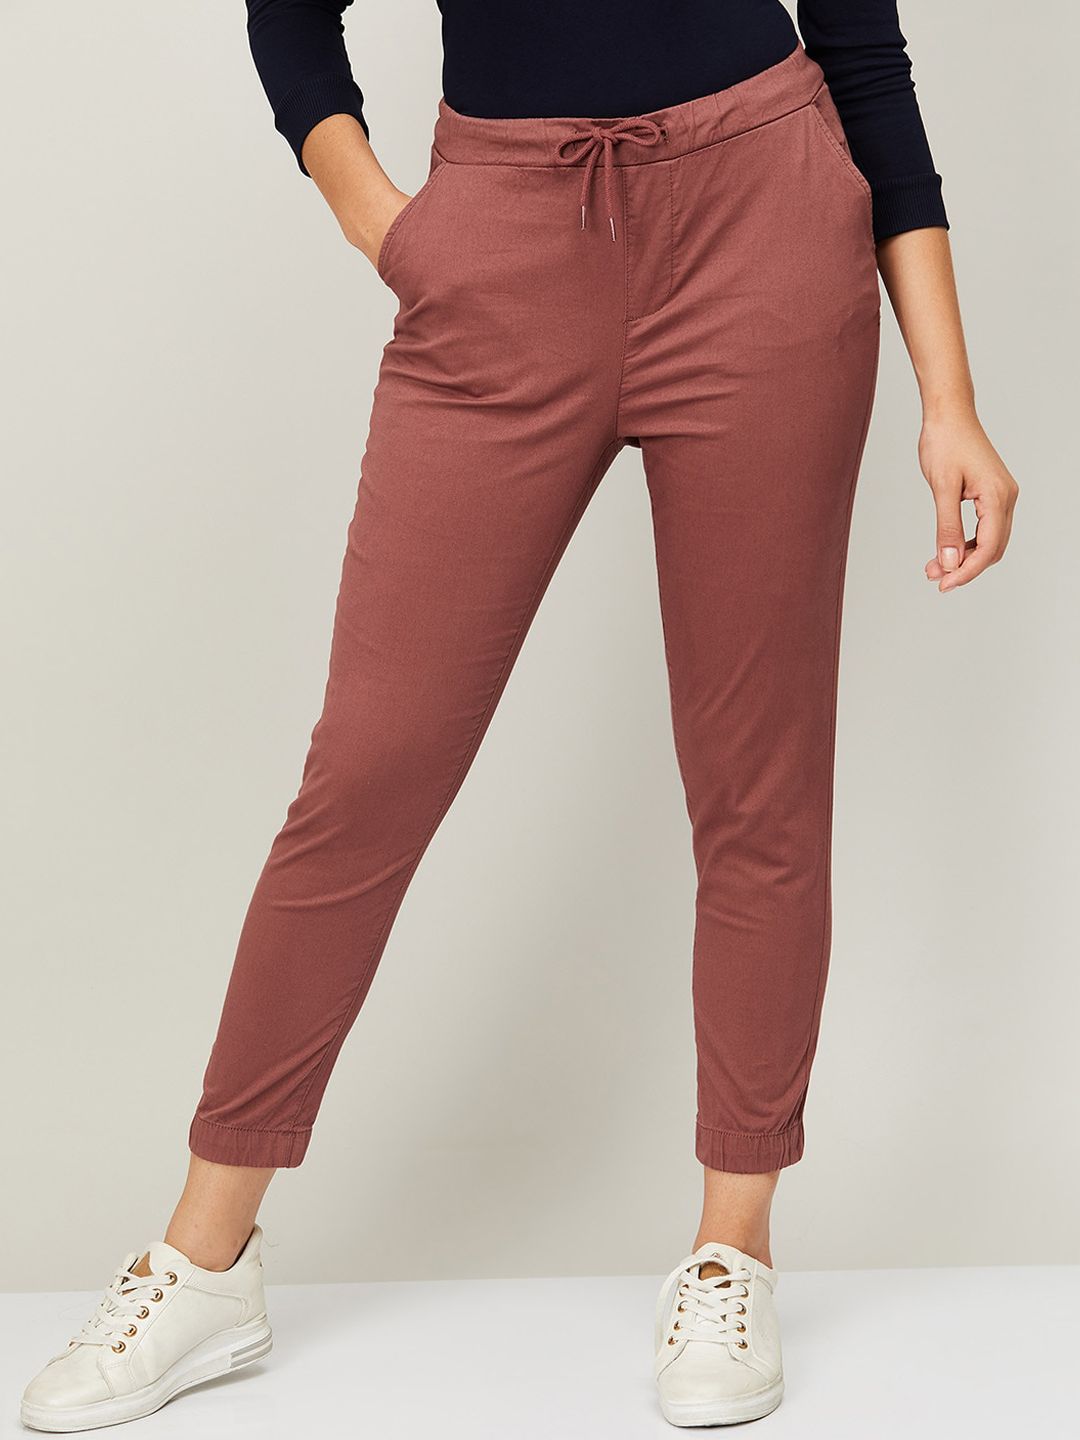 Bossini Women Pink Solid Regular Trousers Price in India